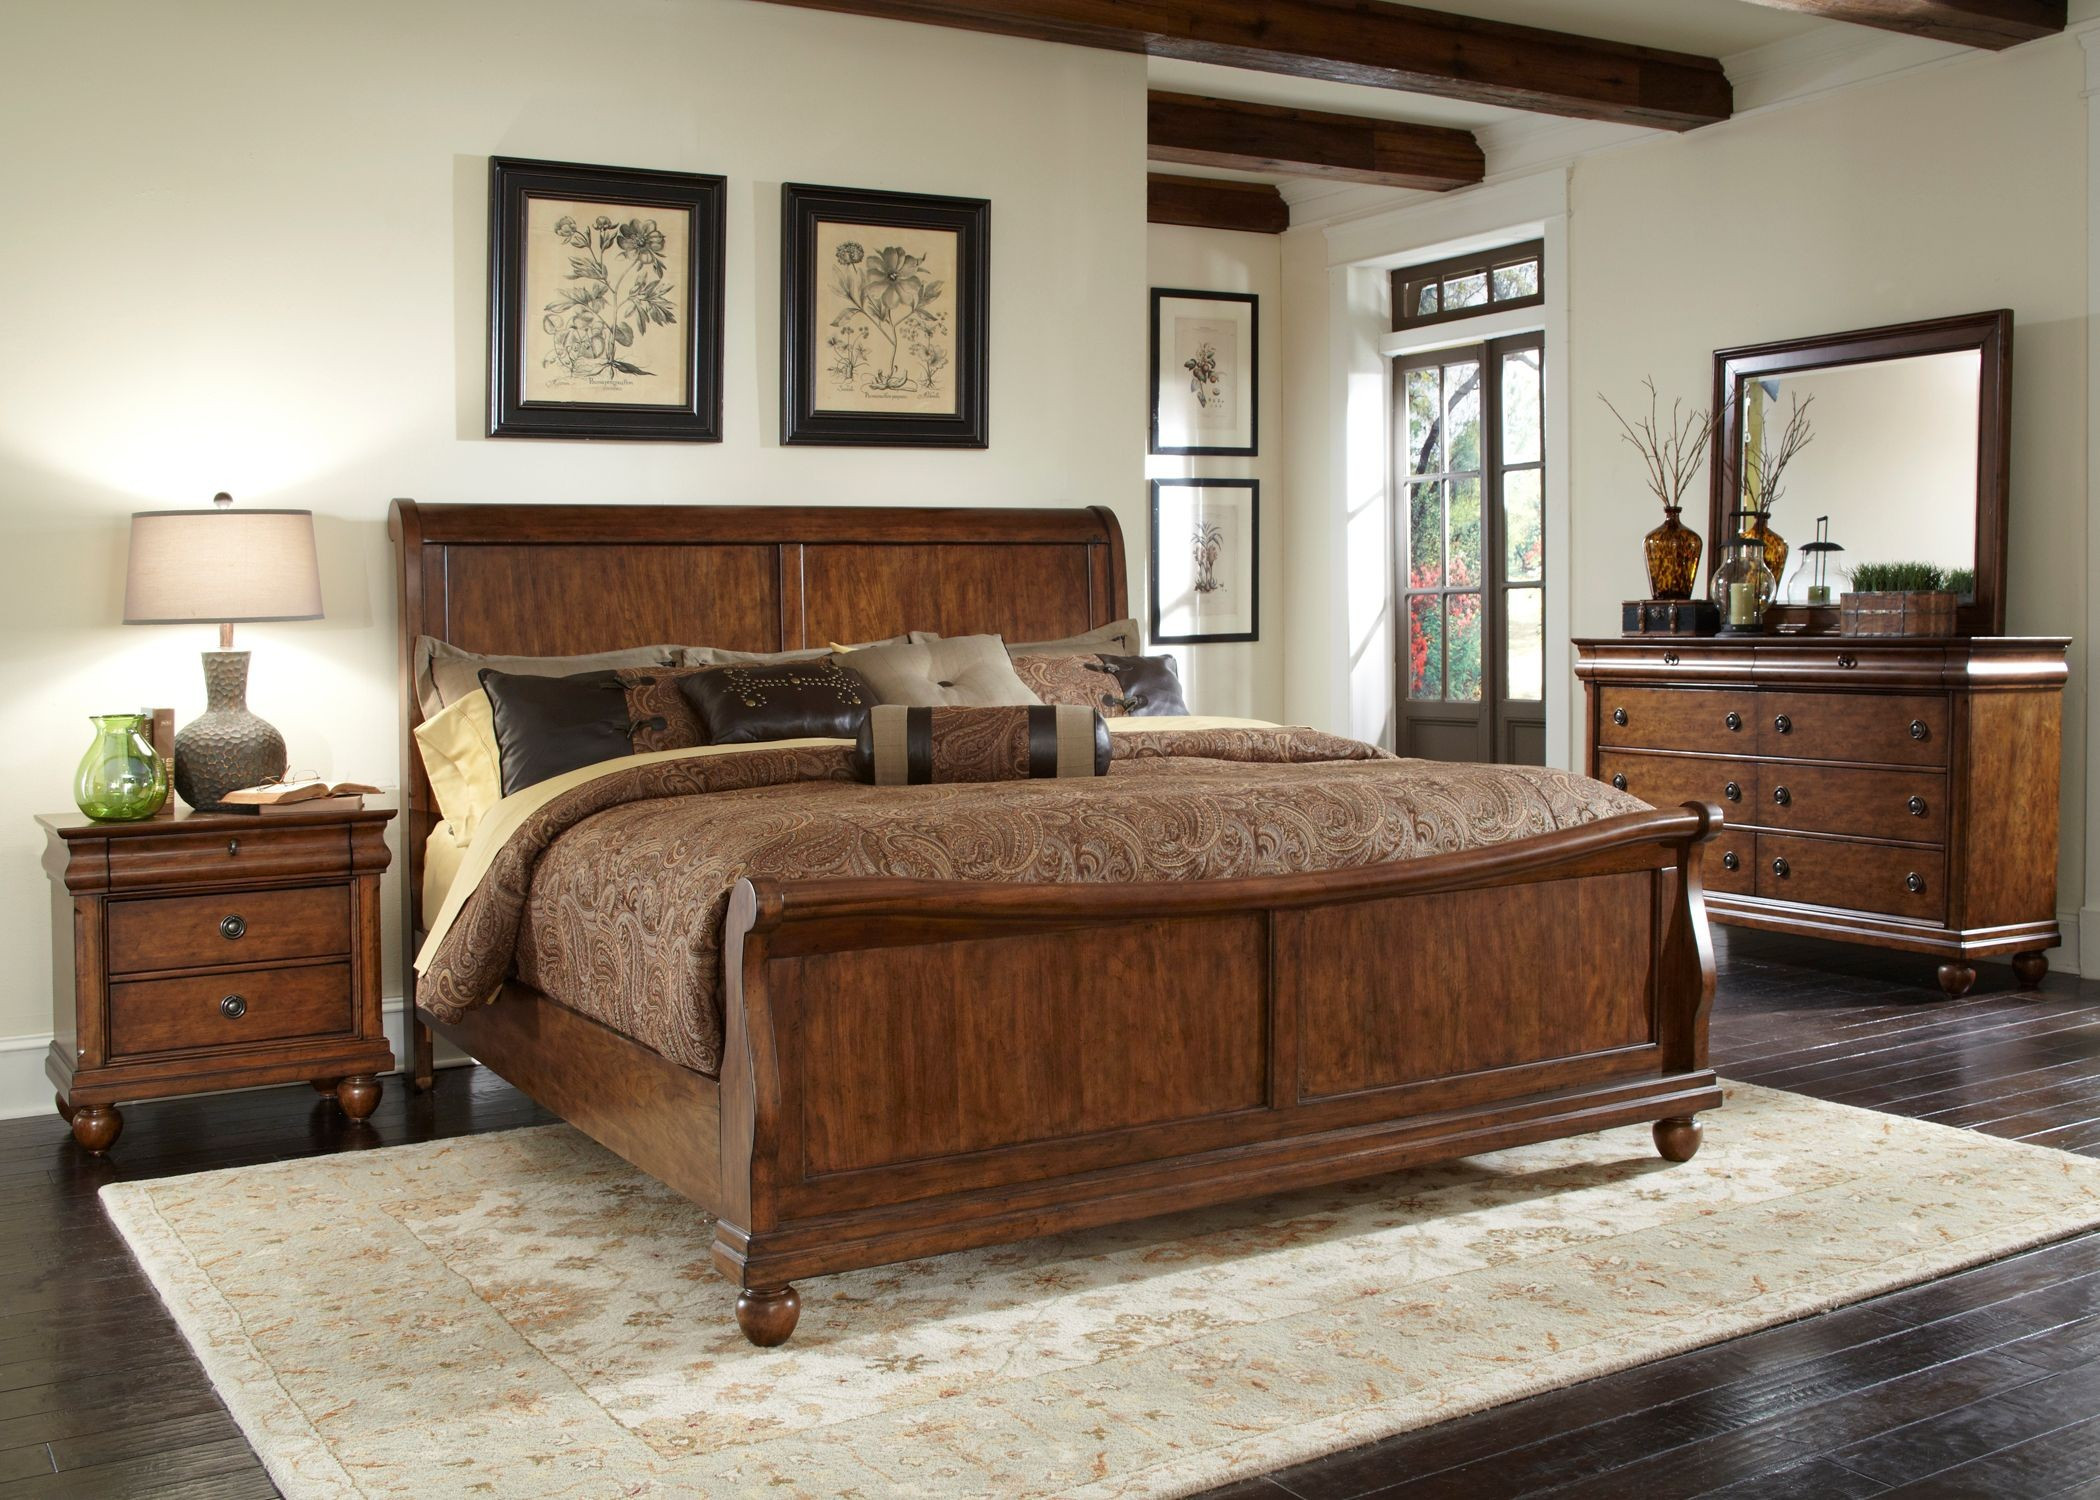 Rustic Bedroom Bench
 Rustic Traditions Bed Bench from Liberty 589 BR47